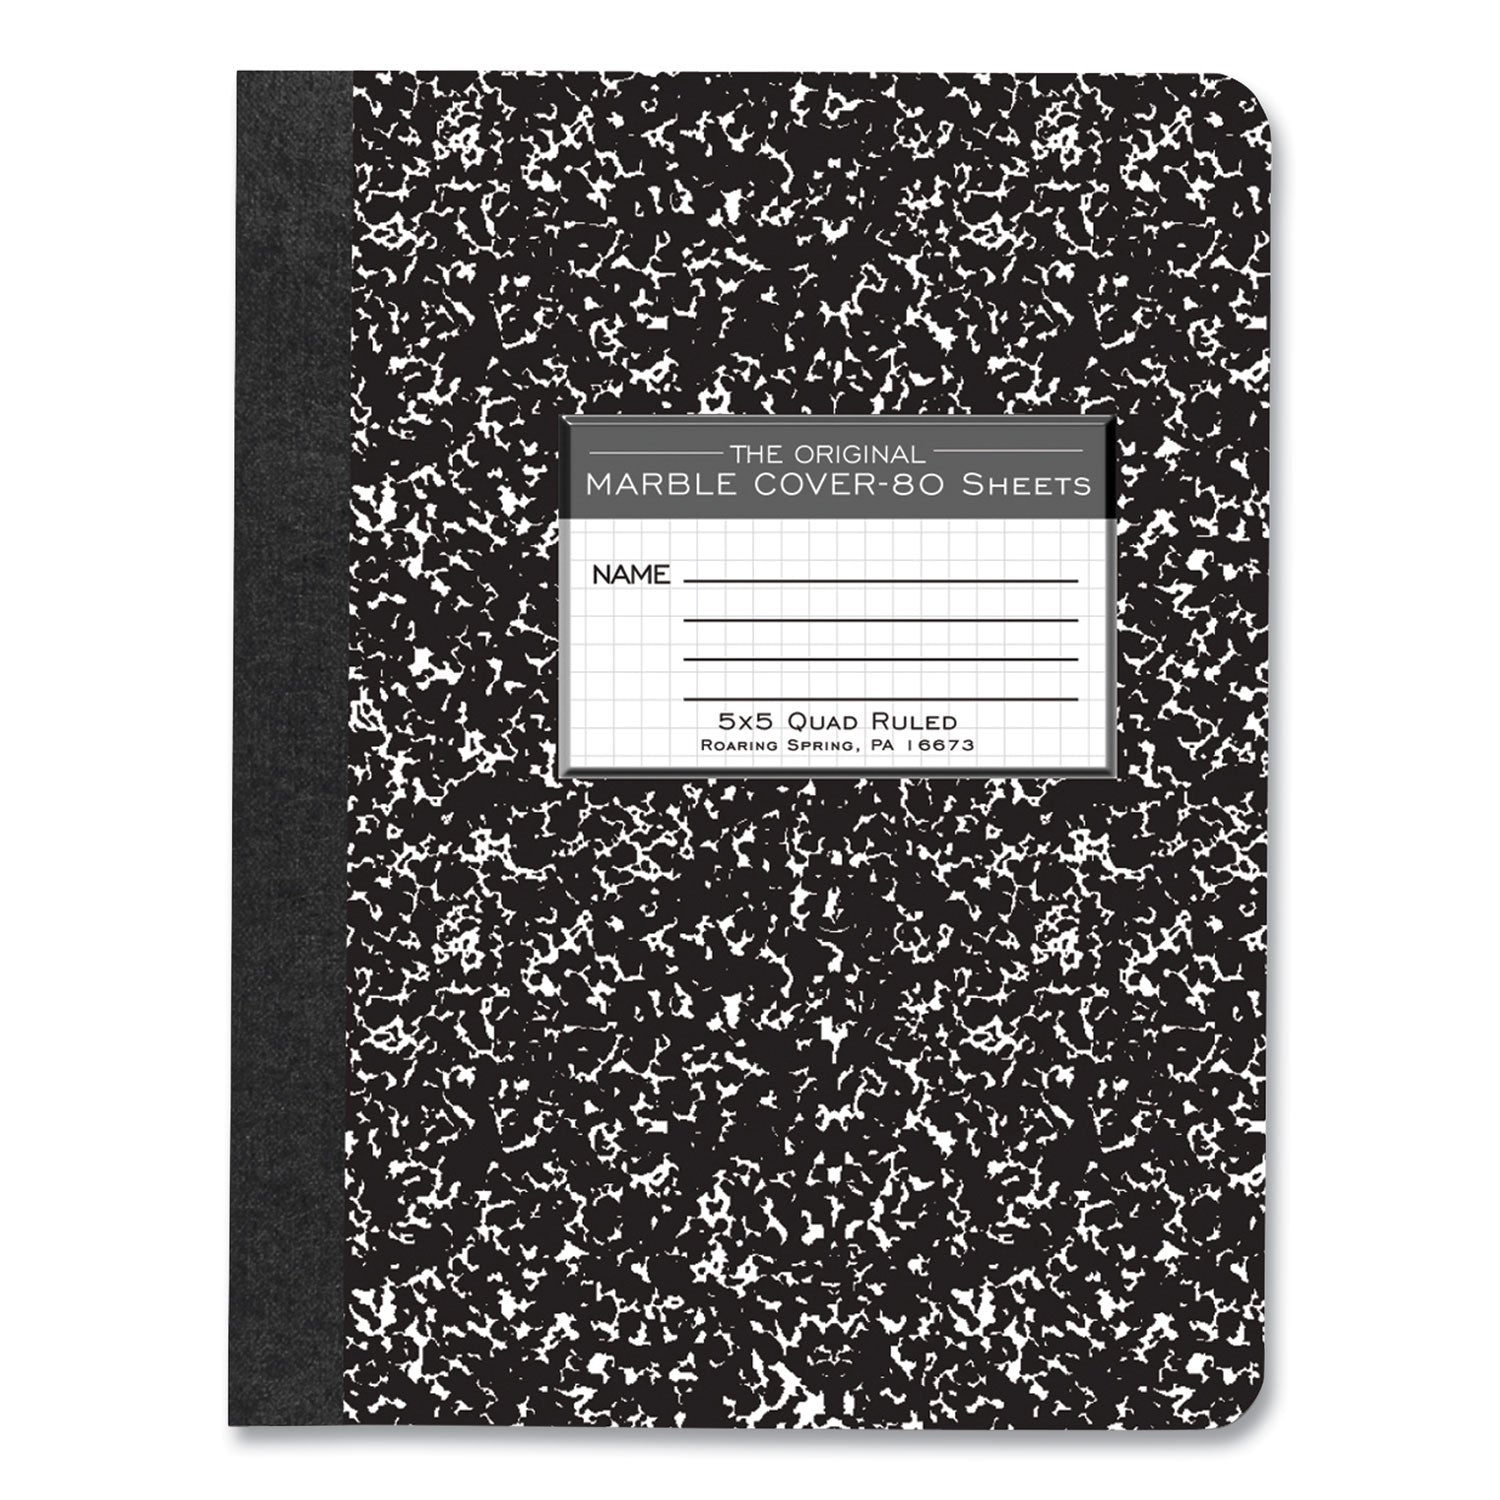 hardcover-composition-book-quadrille-5-sq-in-rule-black-marble-cover-80-975-x-75-sheet-48-ct-ships-in-4-6-bus-days_roa77227cs - 1